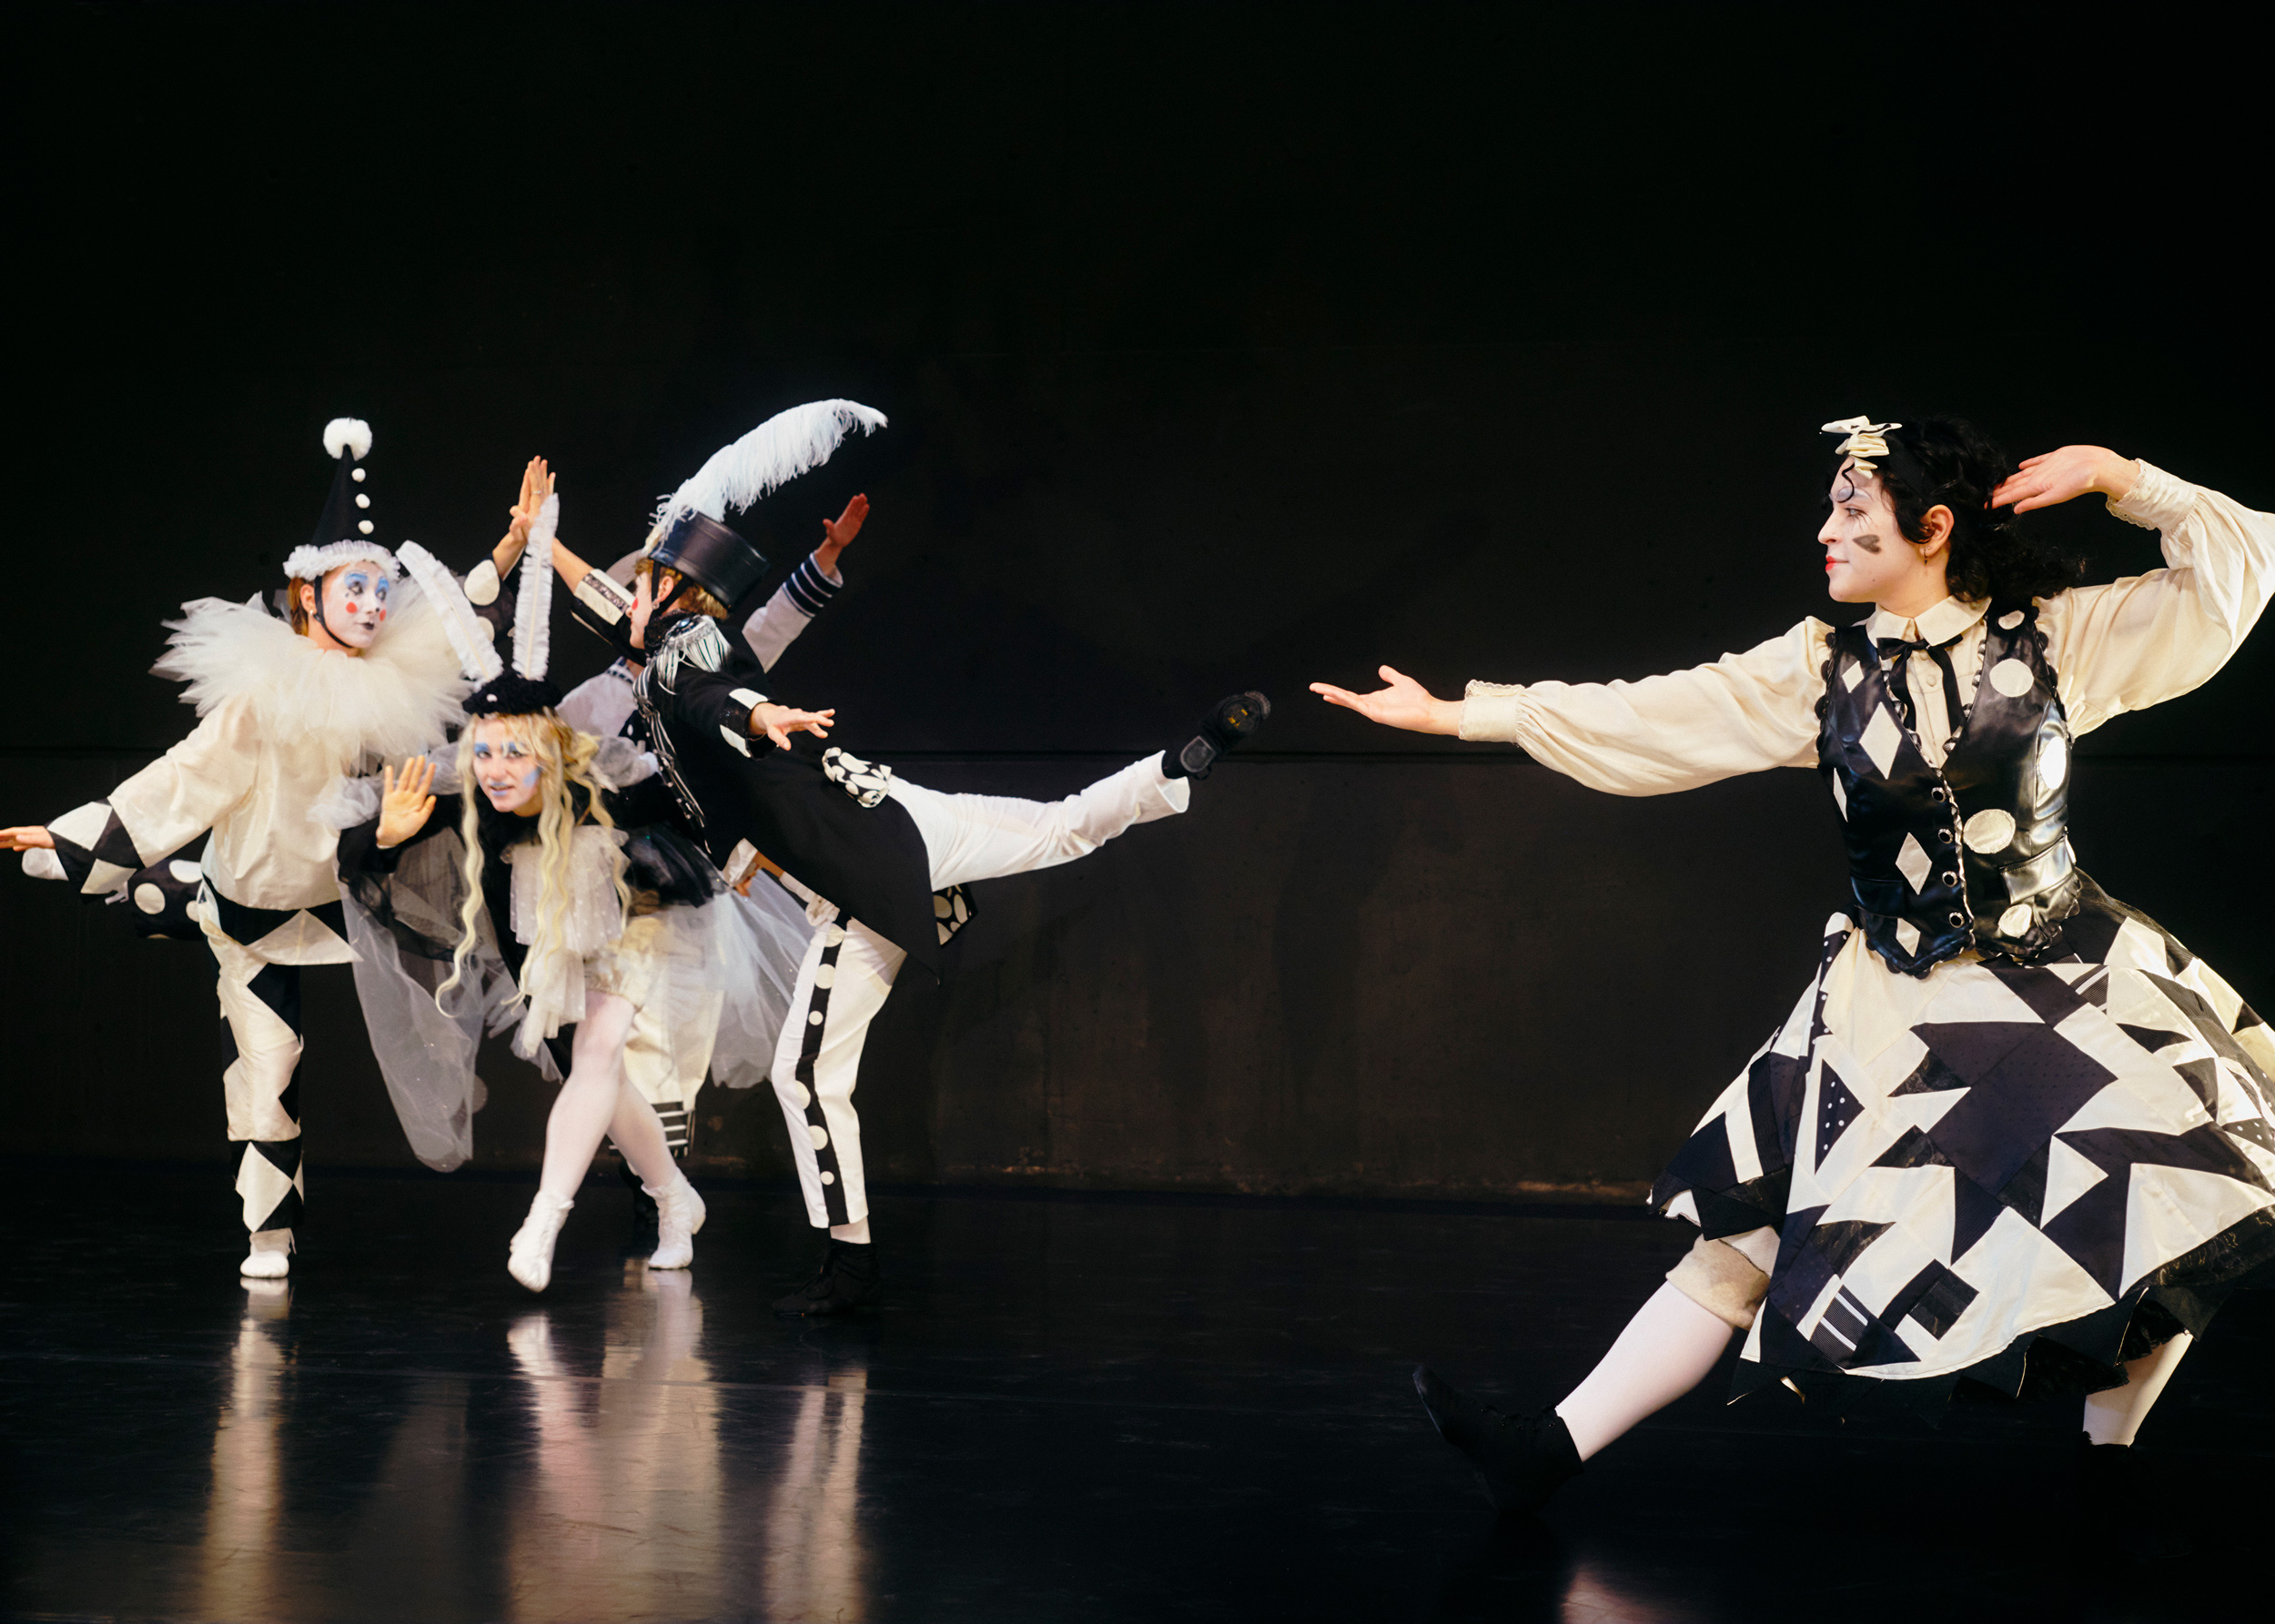 Four dancers in graphic black-and-white costumes and makeup perform in front of a black backdrop.